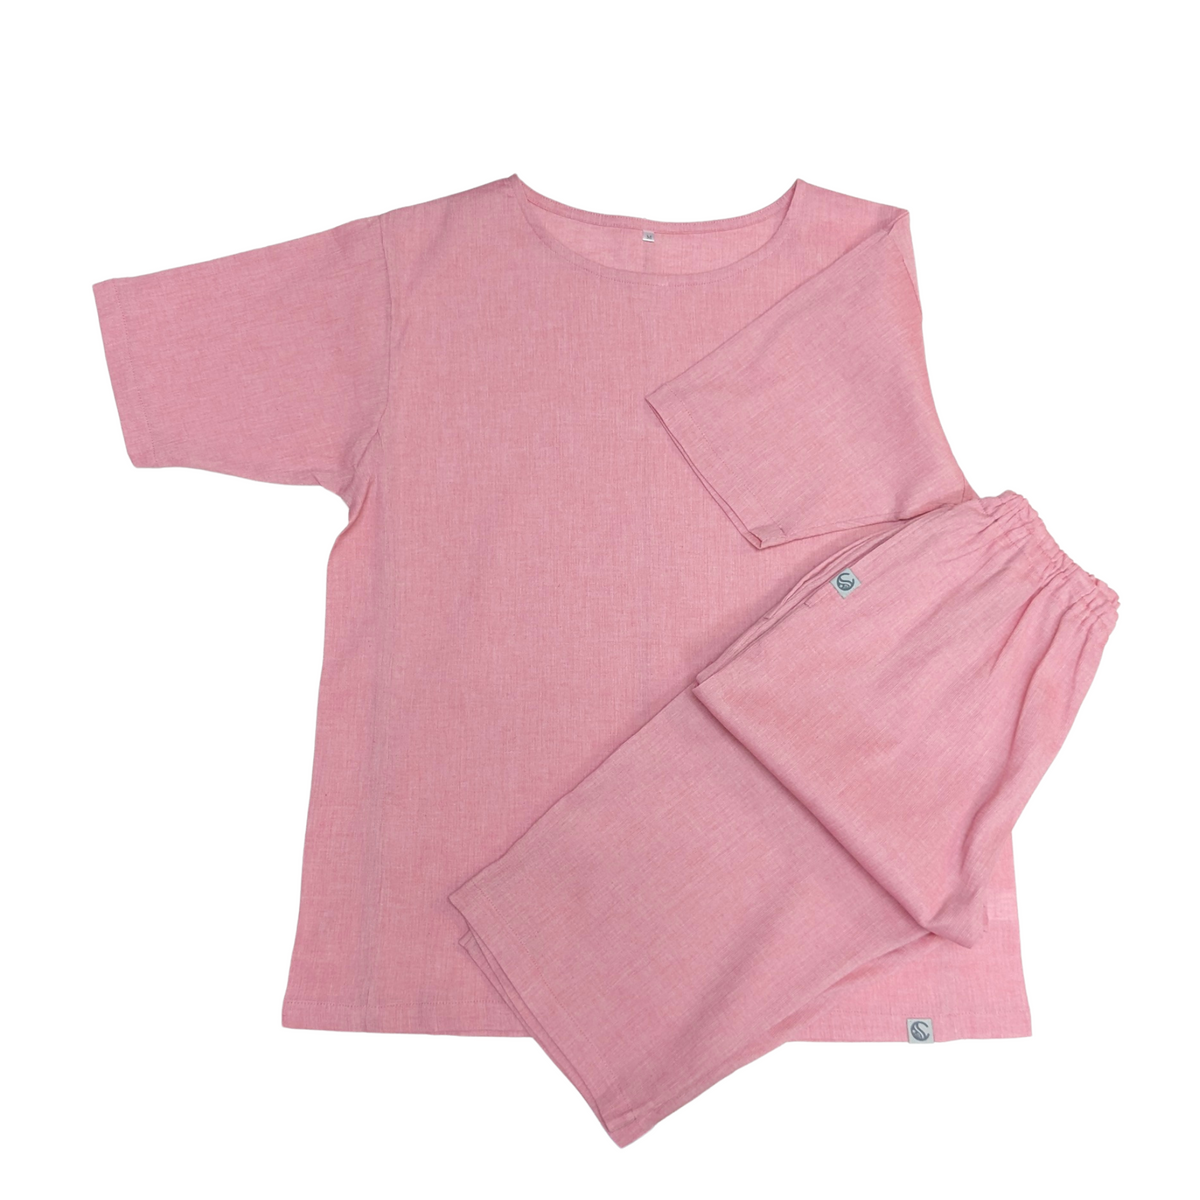 Cool, Stretchy, Comfy Lounge T-Shirt & Pants | Unisex | Solid Color | Pink, Navy, Gray - CHERRYSTONEstyle